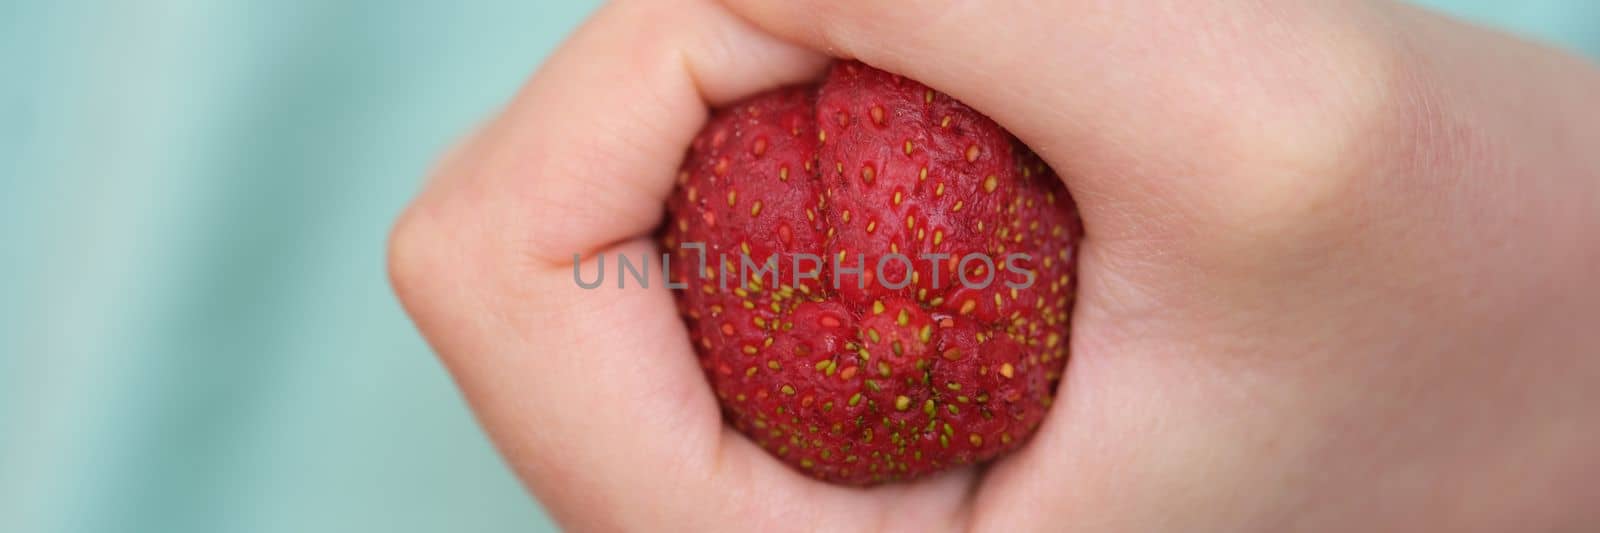 Clenched strawberries in fist in form of constipation of colon by kuprevich